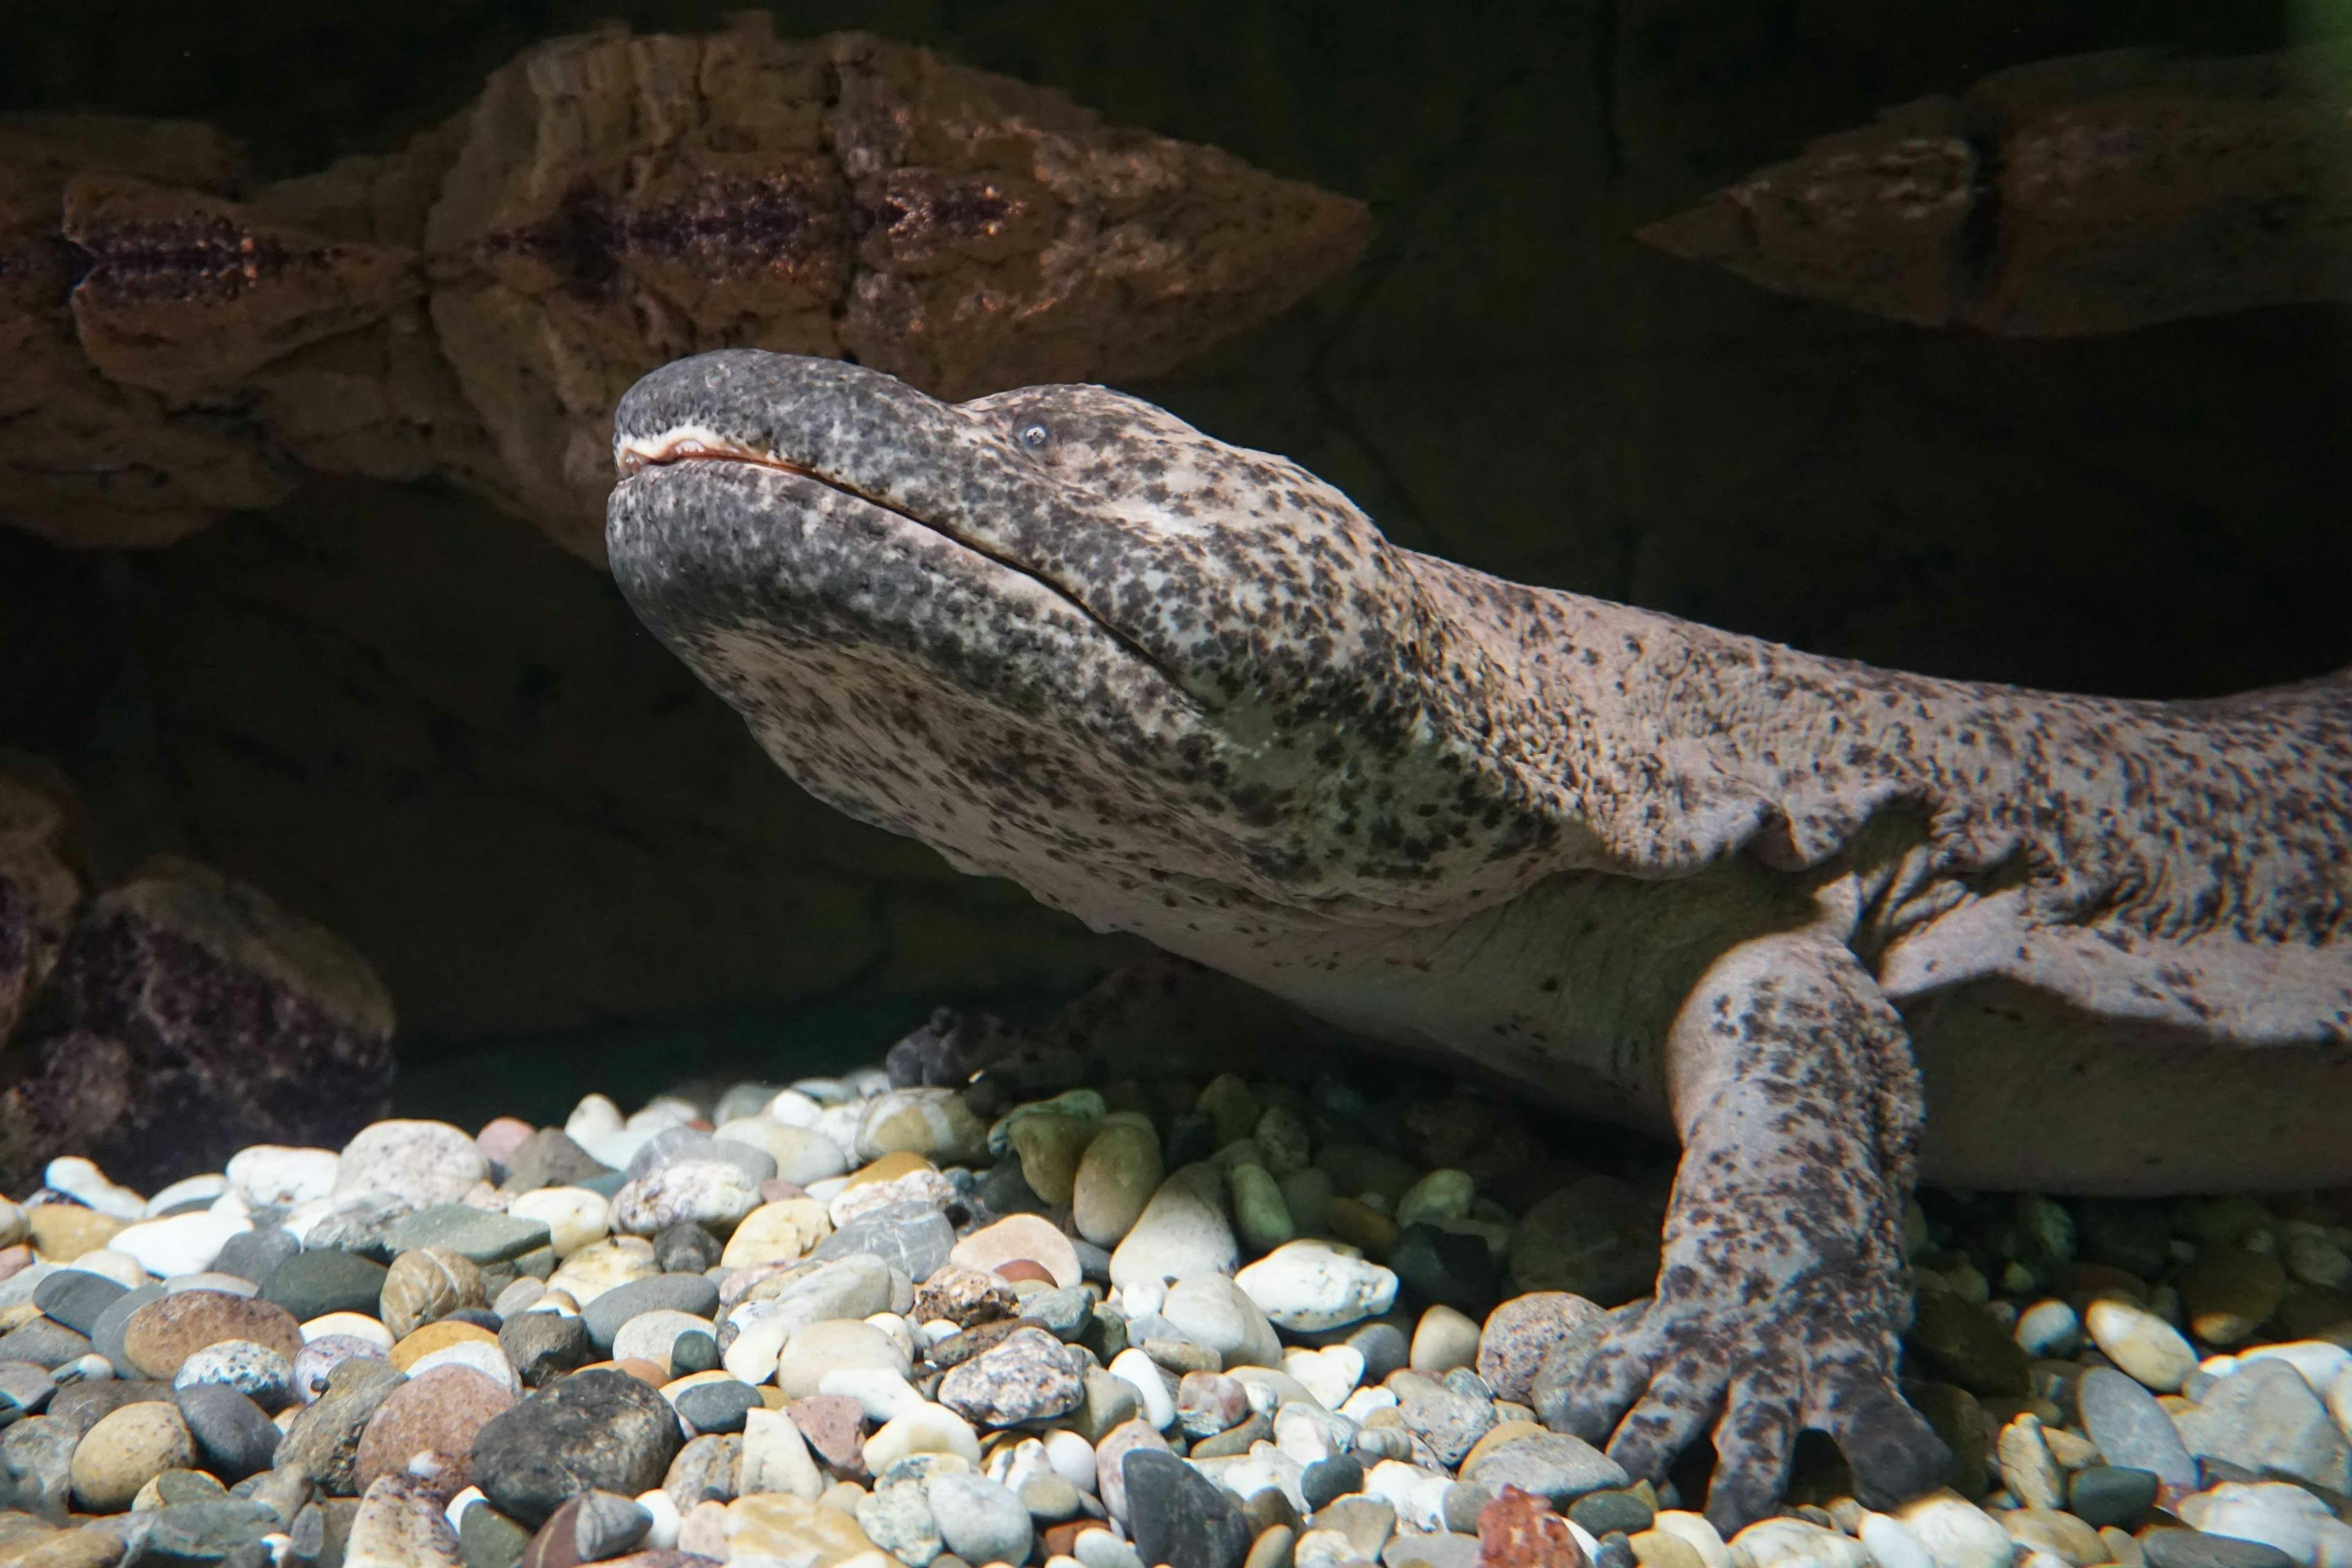 Chinese Giant Salamander resting on its legs